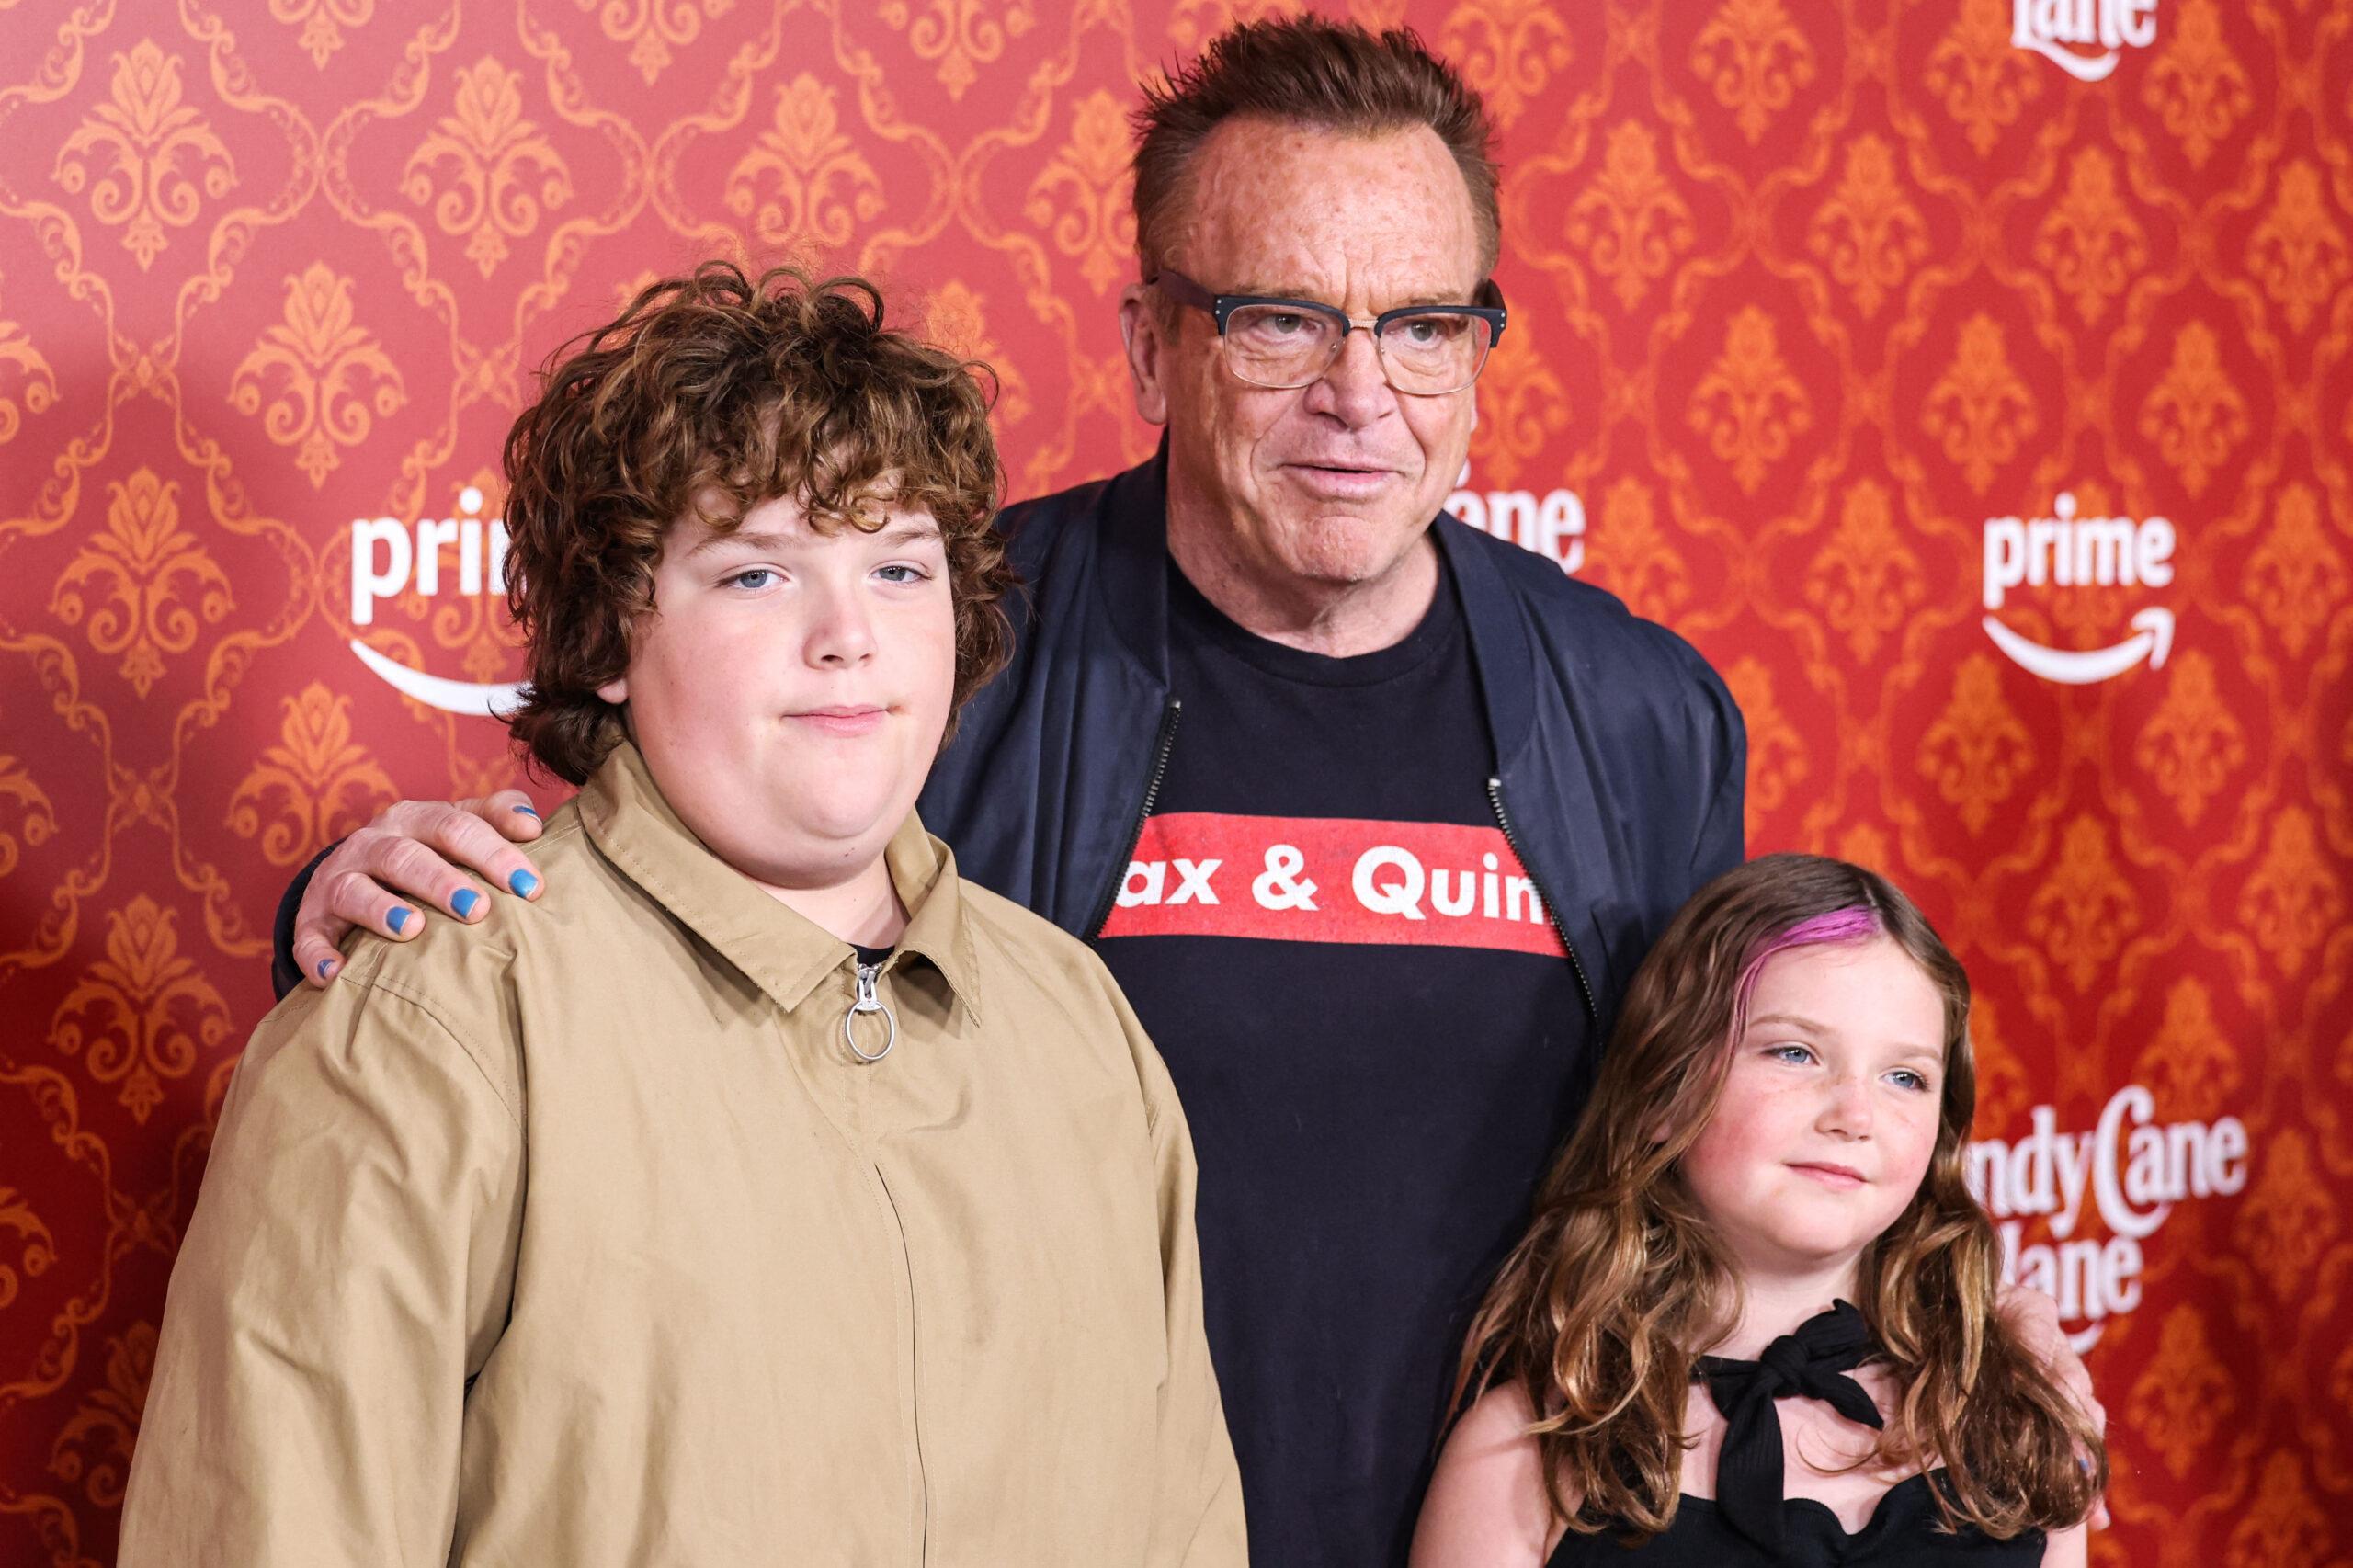 Tom Arnold with his kids, Jax and Quinn.